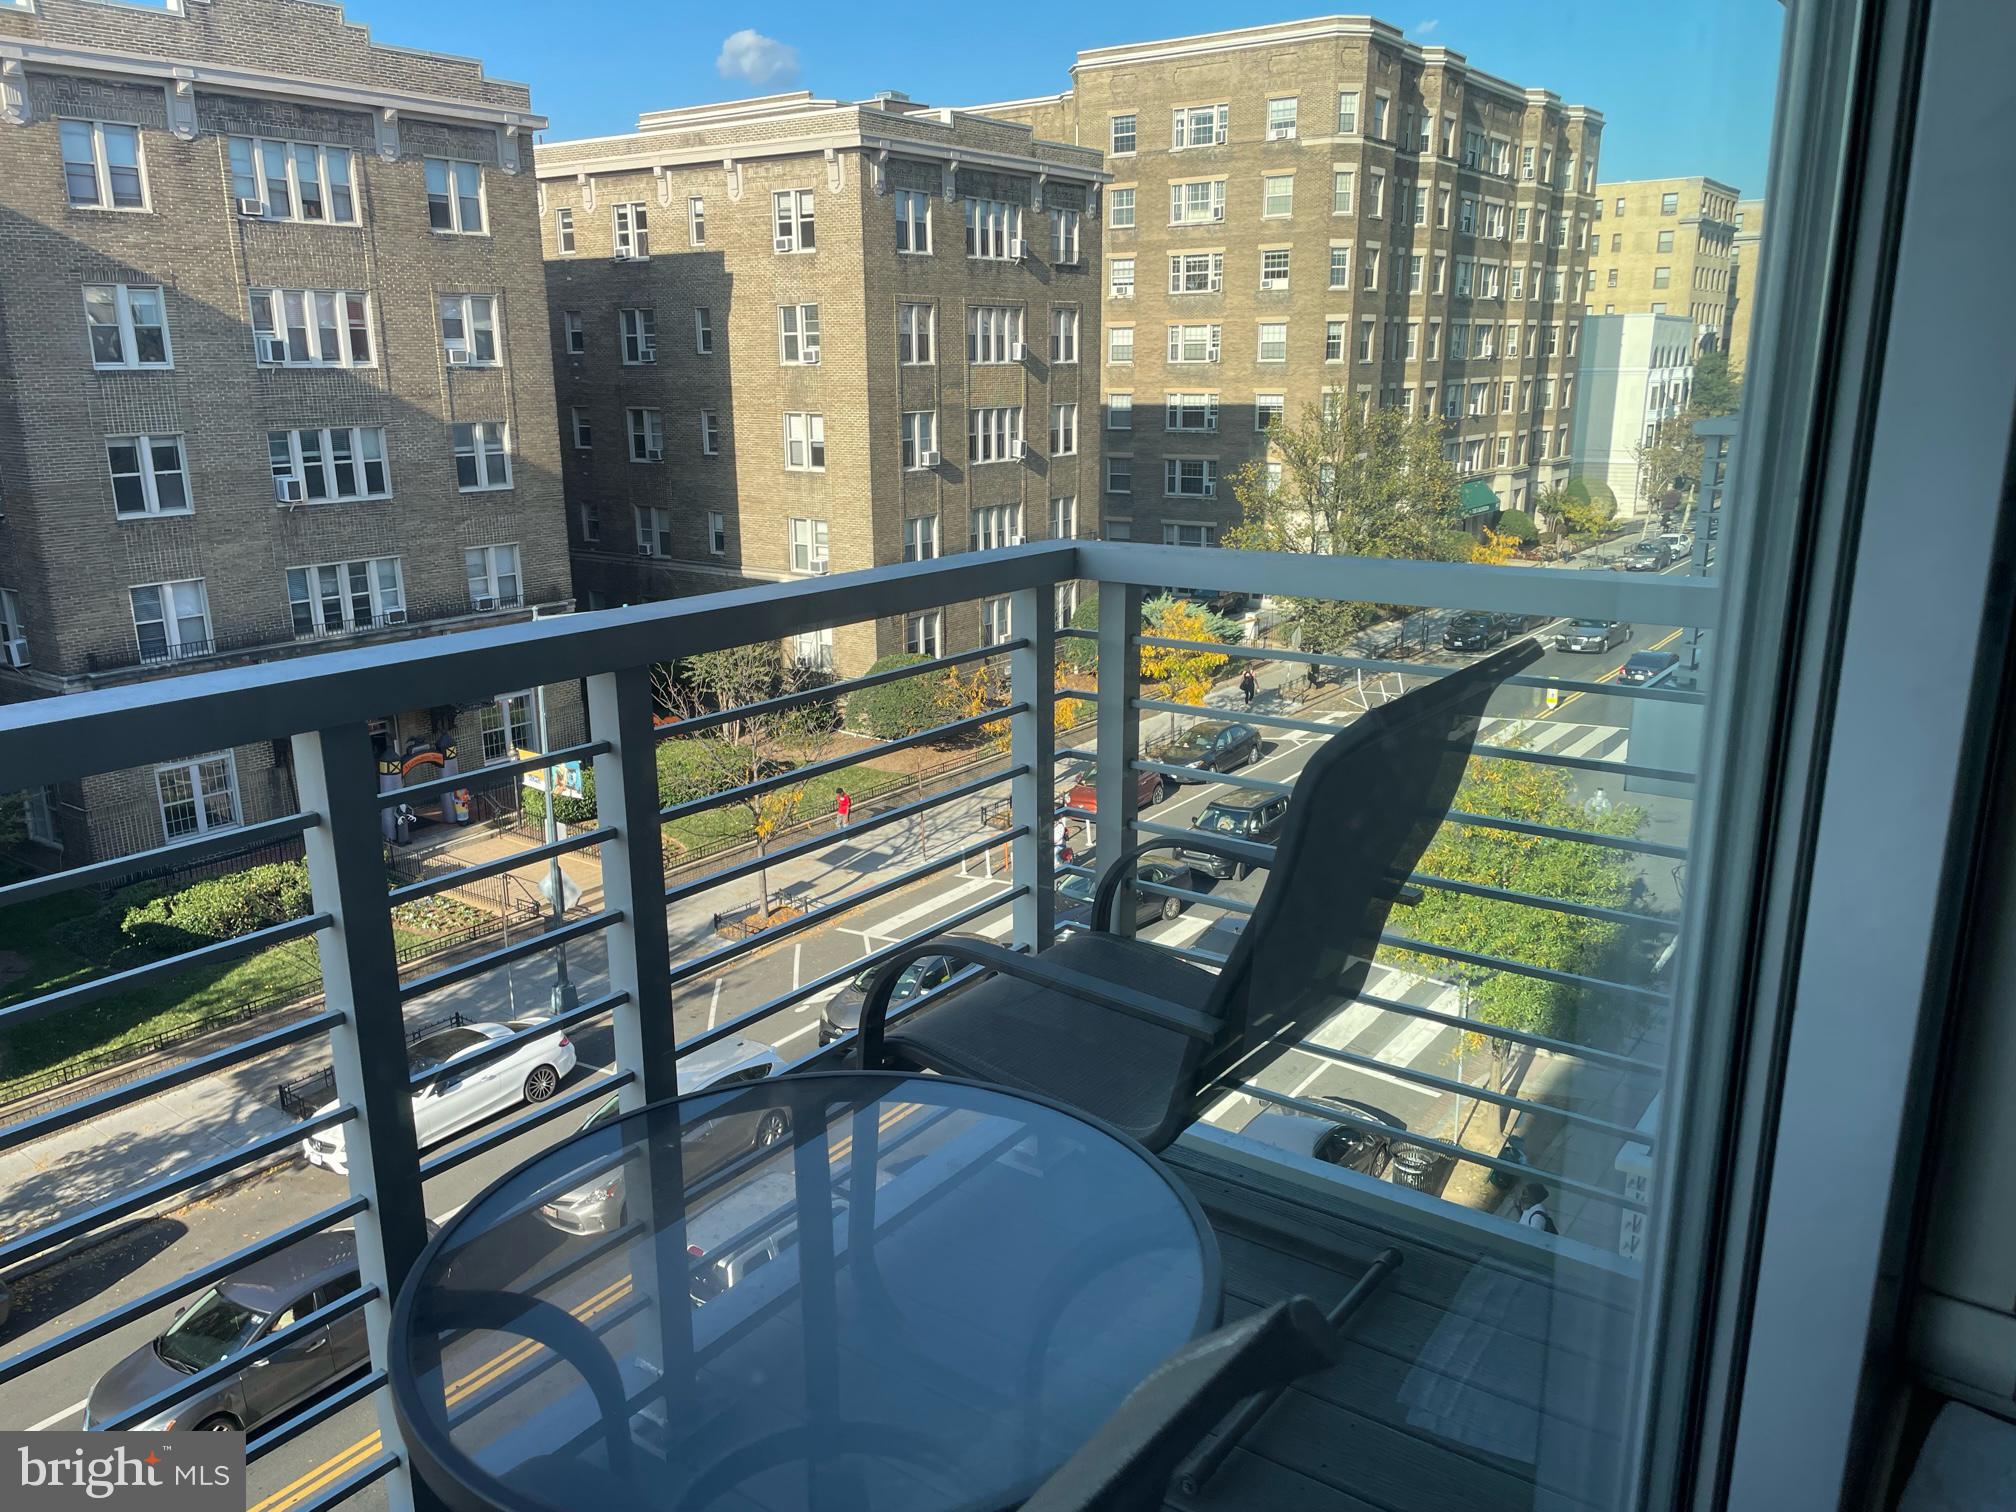 a view of a balcony with a floor to ceiling window next to a tall building